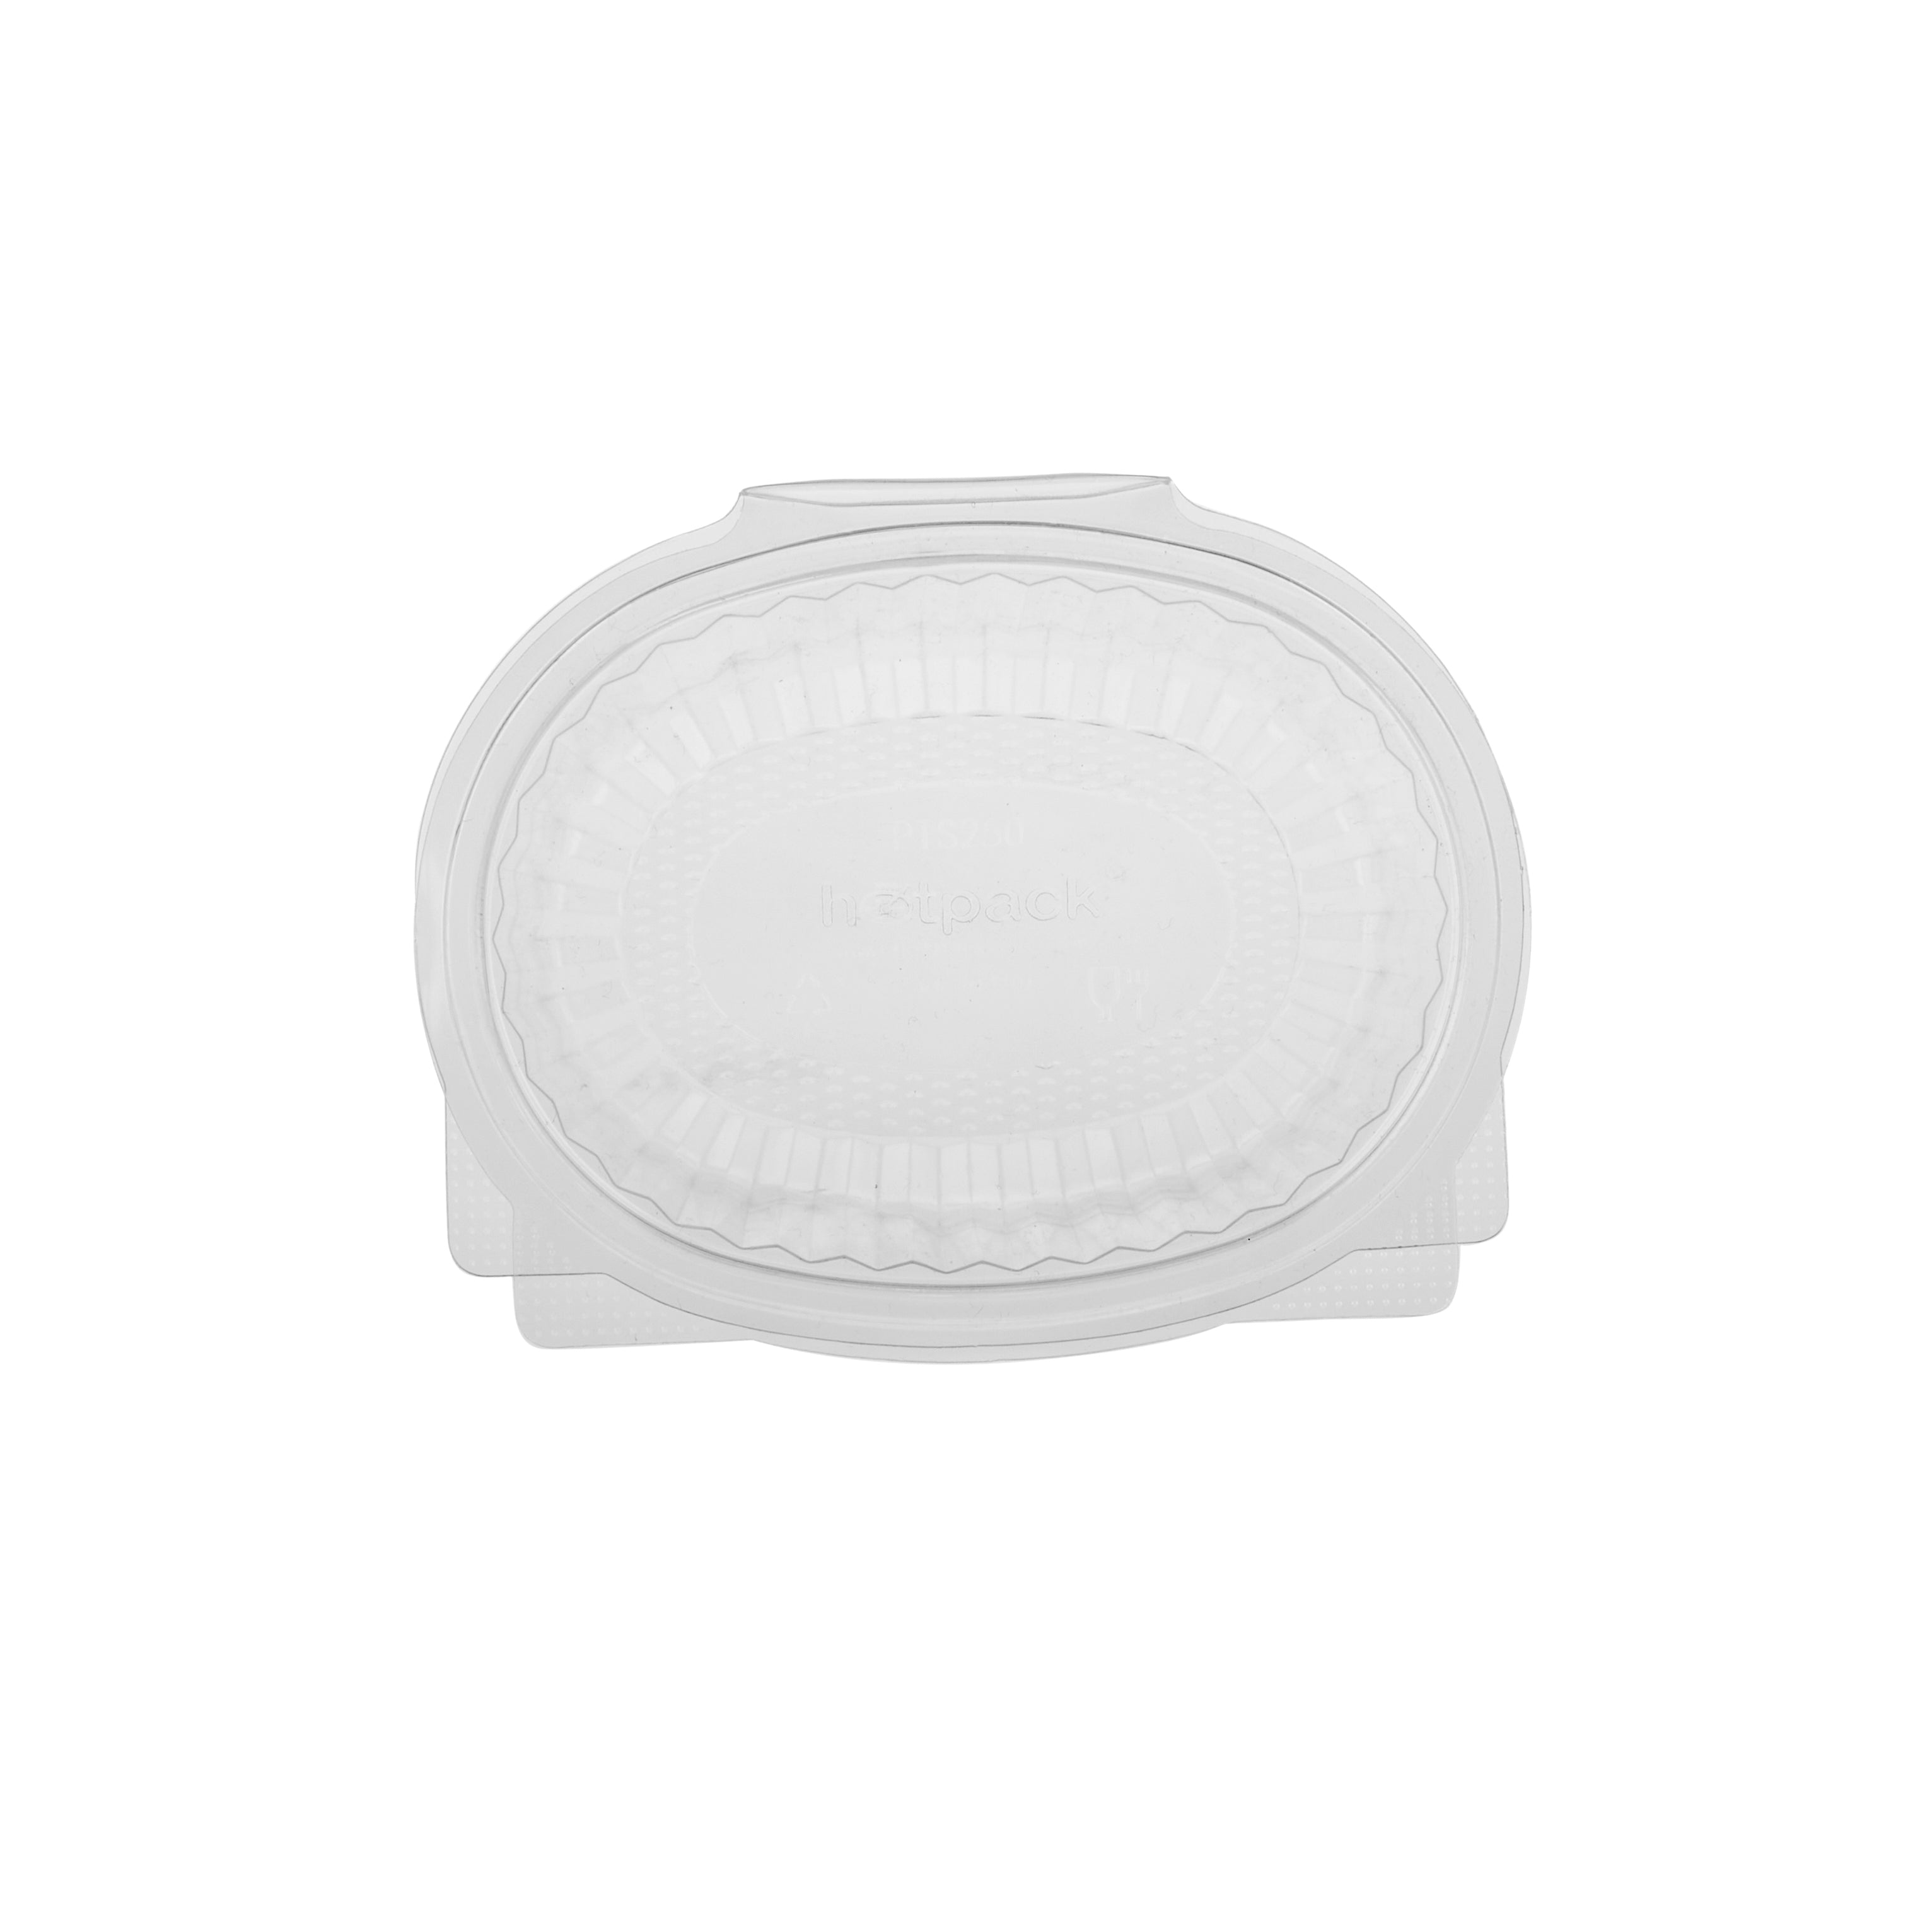 250 Pieces Clear Hinged Oval Container 250 ml - Hotpack UAE